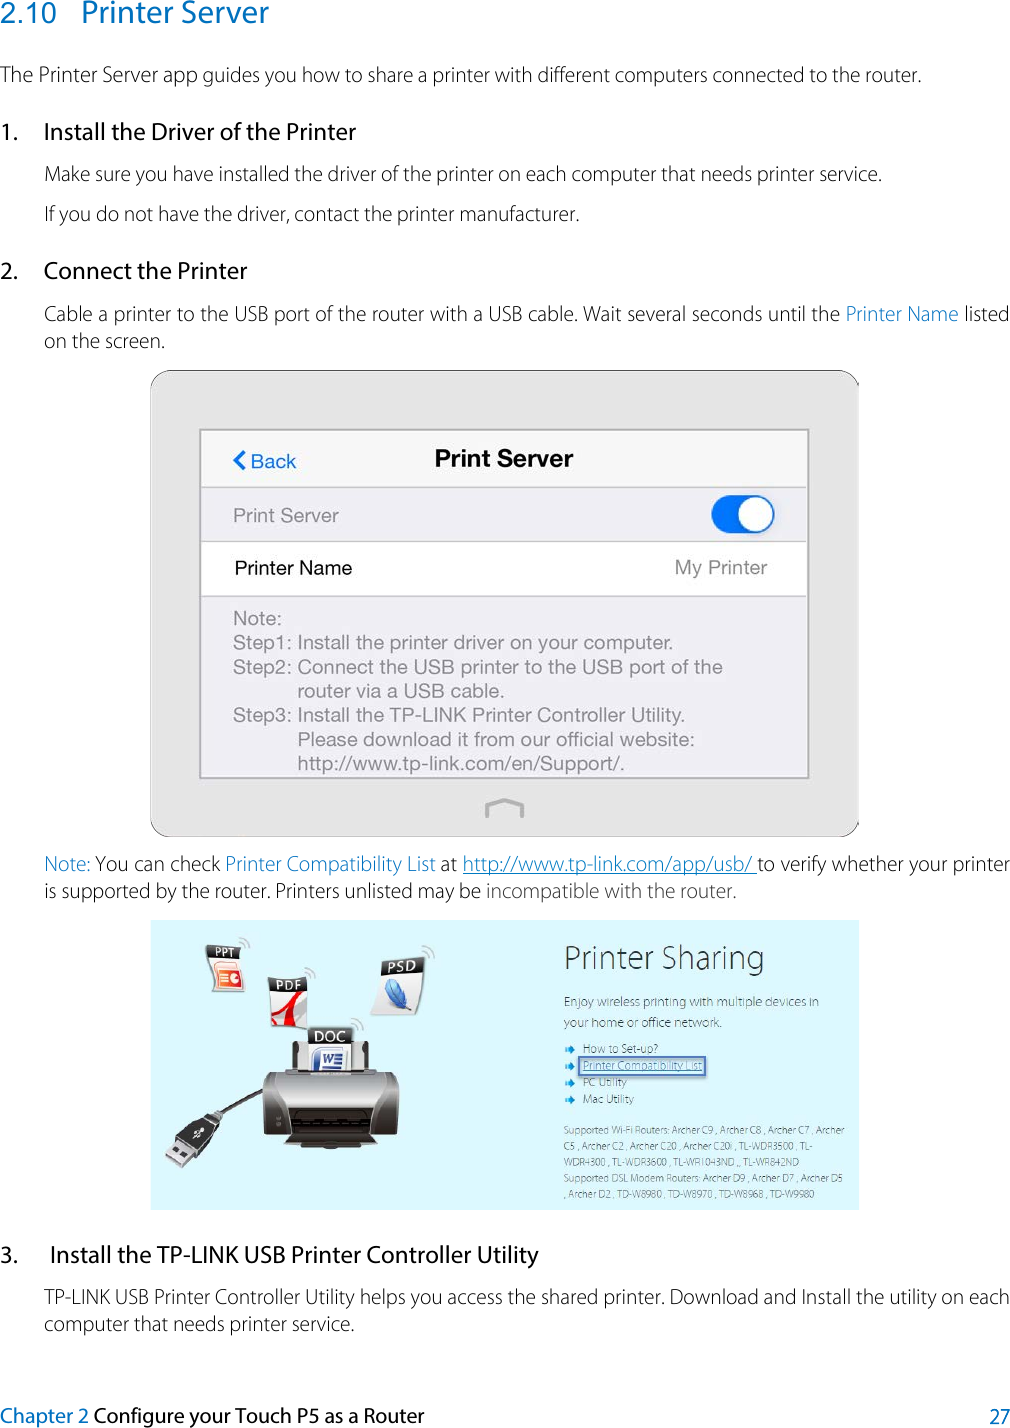  2.10 Printer Server The Printer Server app guides you how to share a printer with different computers connected to the router. 1. Install the Driver of the Printer Make sure you have installed the driver of the printer on each computer that needs printer service. If you do not have the driver, contact the printer manufacturer. 2. Connect the Printer Cable a printer to the USB port of the router with a USB cable. Wait several seconds until the Printer Name listed on the screen.  Note: You can check Printer Compatibility List at http://www.tp-link.com/app/usb/ to verify whether your printer is supported by the router. Printers unlisted may be incompatible with the router.  3. Install the TP-LINK USB Printer Controller Utility TP-LINK USB Printer Controller Utility helps you access the shared printer. Download and Install the utility on each computer that needs printer service. Chapter 2 Configure your Touch P5 as a Router 27 